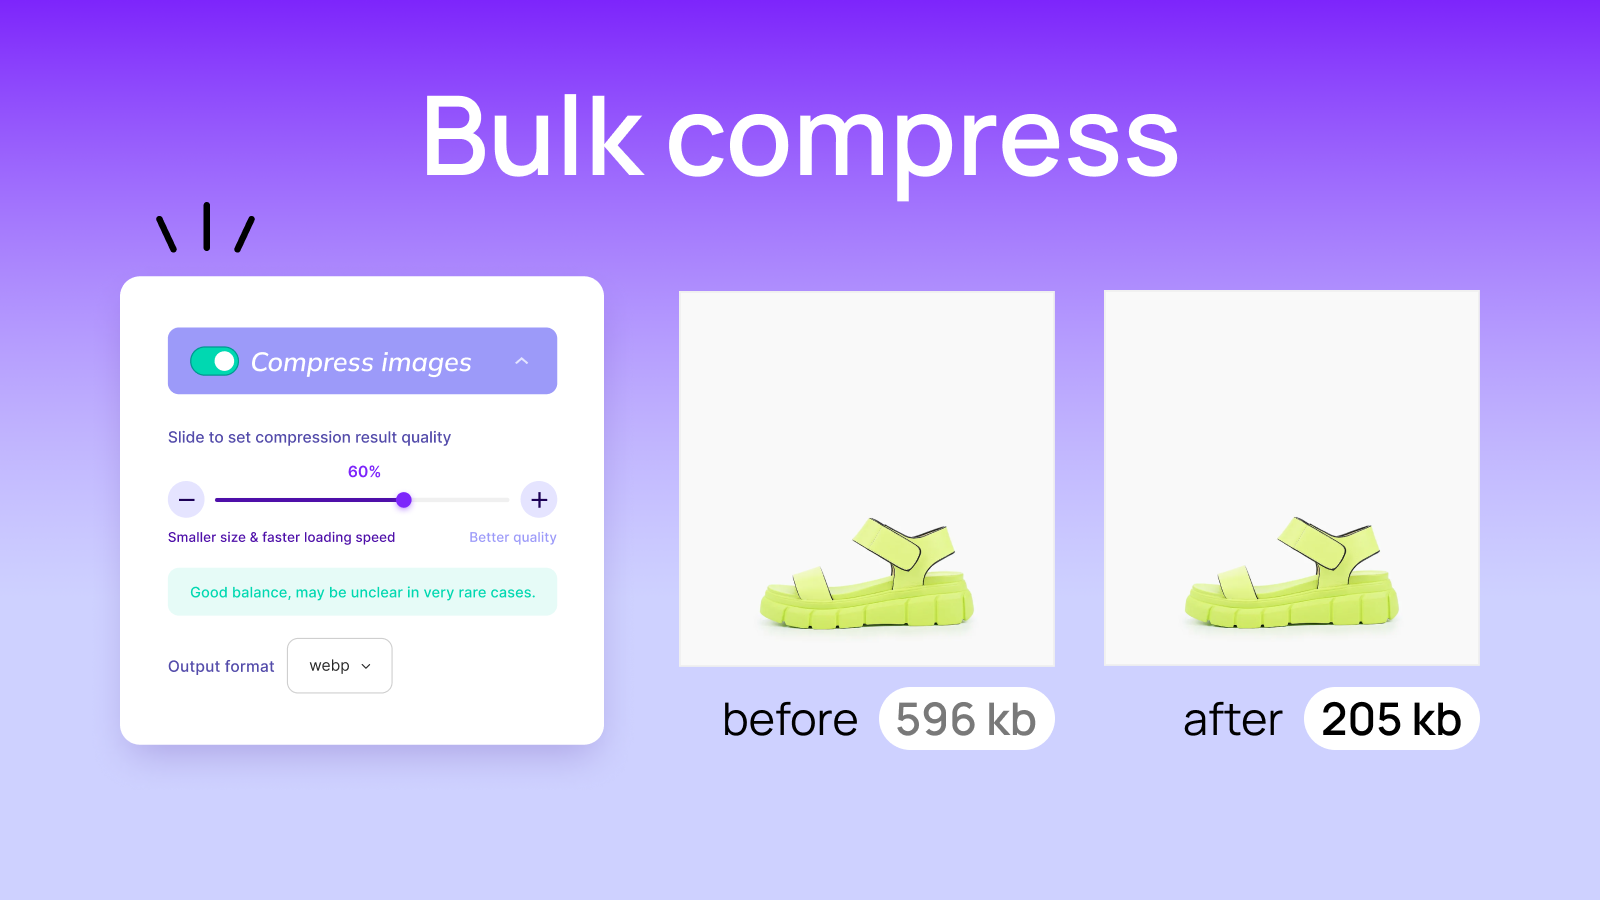 Compress images to improve your page load speed and Google rank